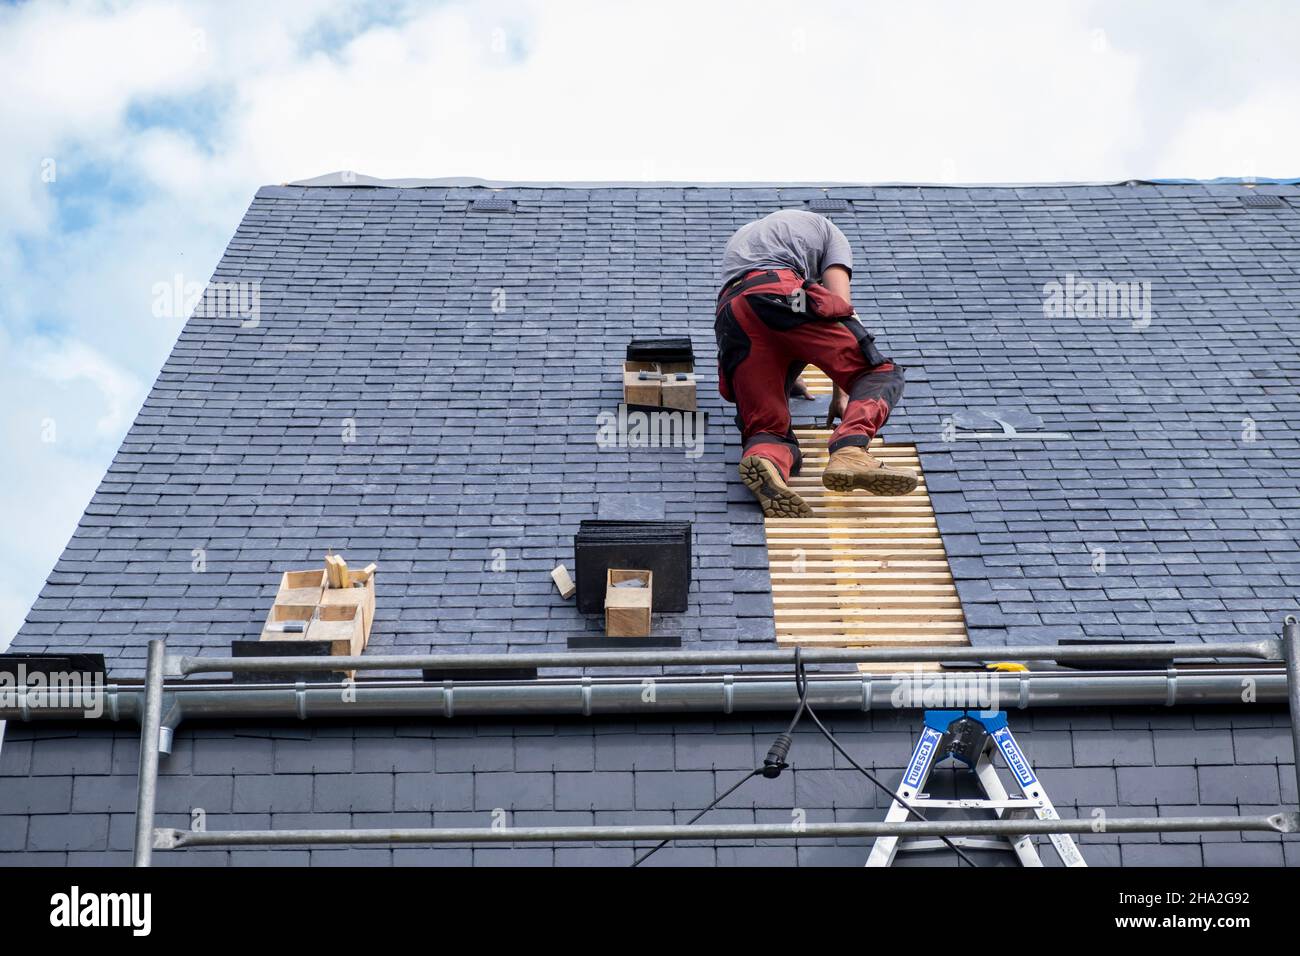 Renovation works, external roof insulation. Roofer specialized in external insulation laying slates on the roof of a house Stock Photo